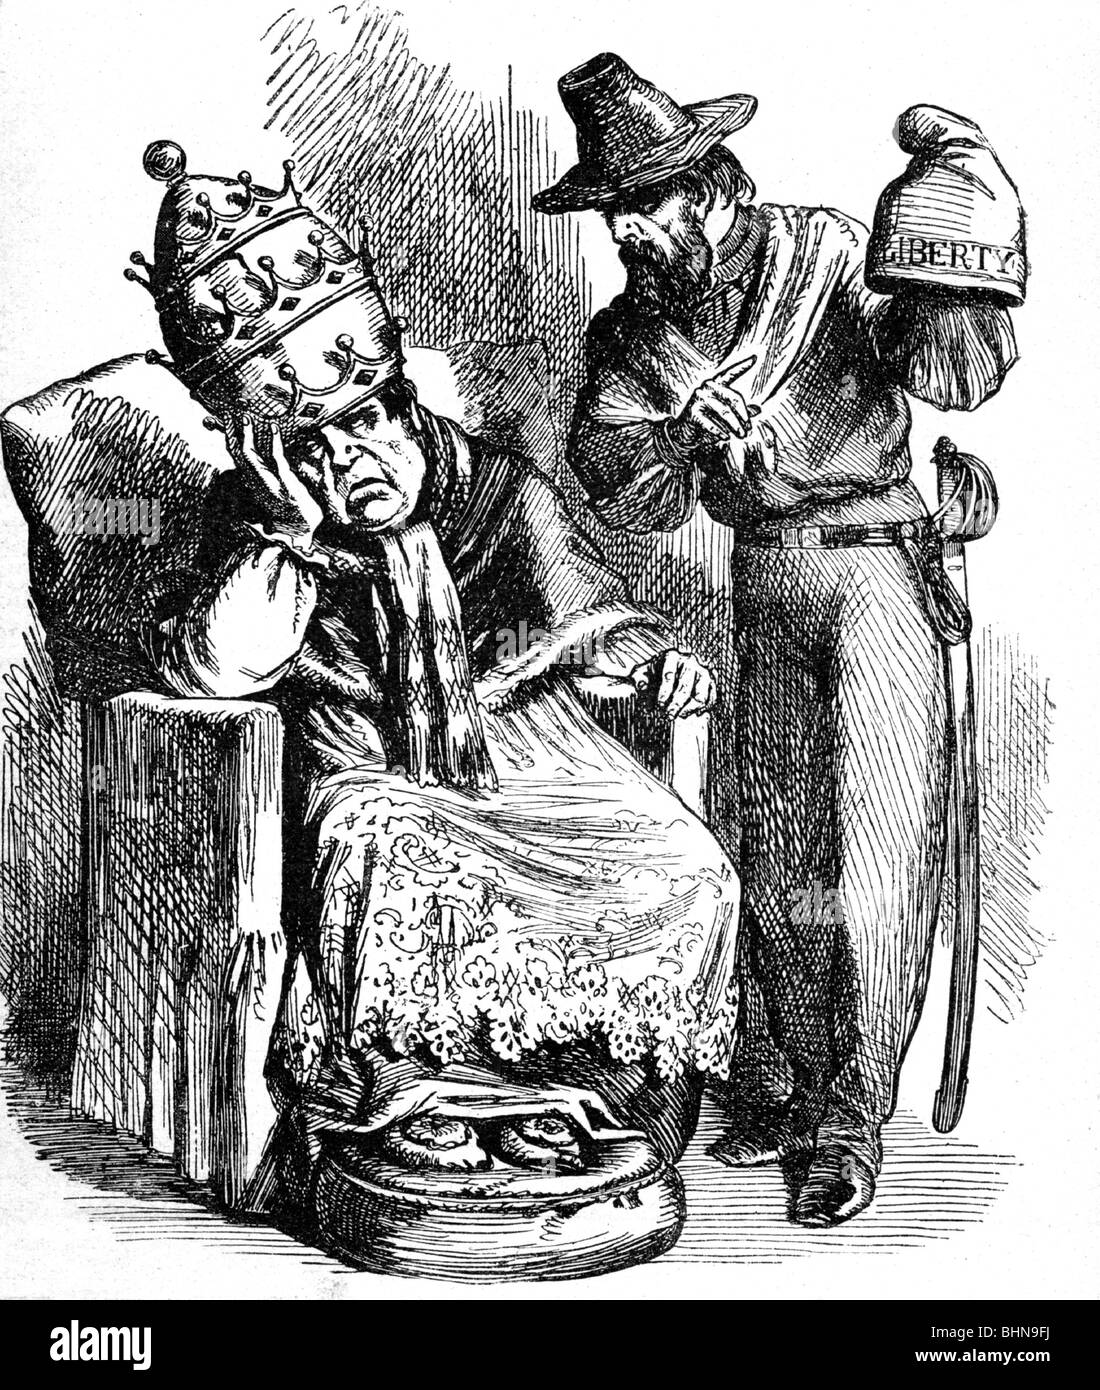 geography / travel, Italy, politics, Italian unification, caricature, Giuseppe Garibaldi offers Pope Pius IX a freedom cap, drawing from 'Punch', London, 1860, Stock Photo